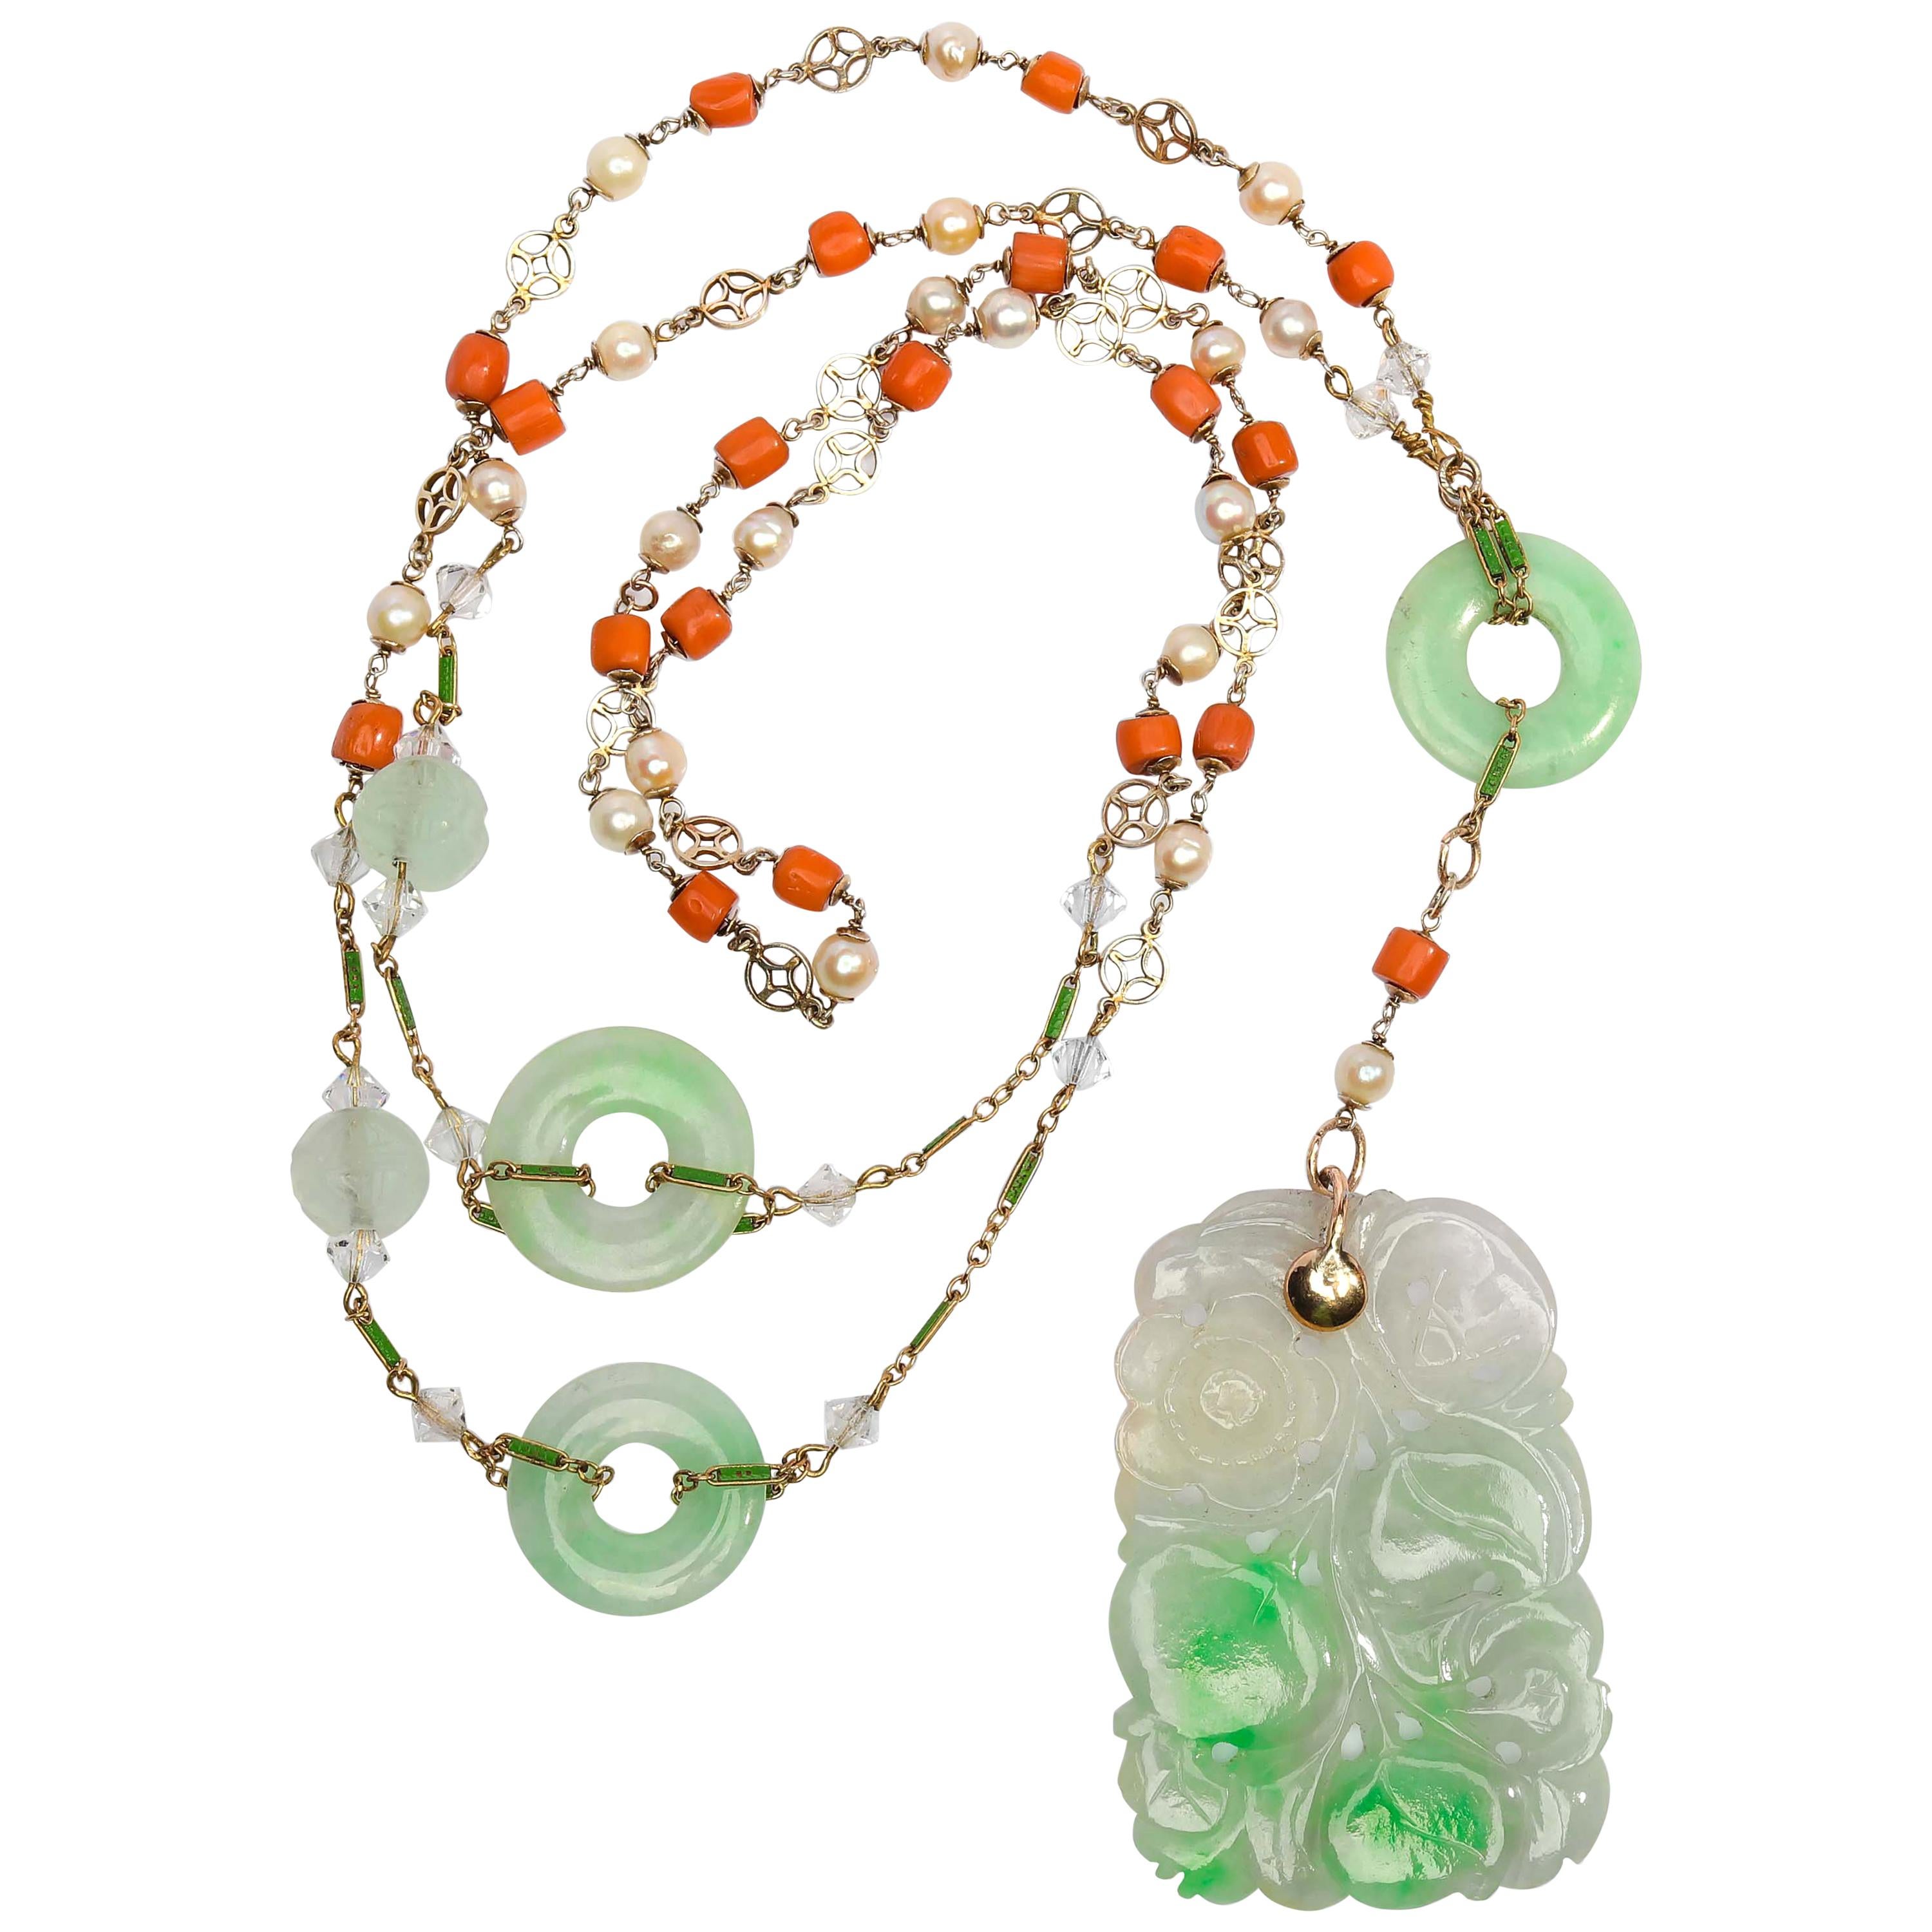 1920s Jade Necklace with Pearls and Coral